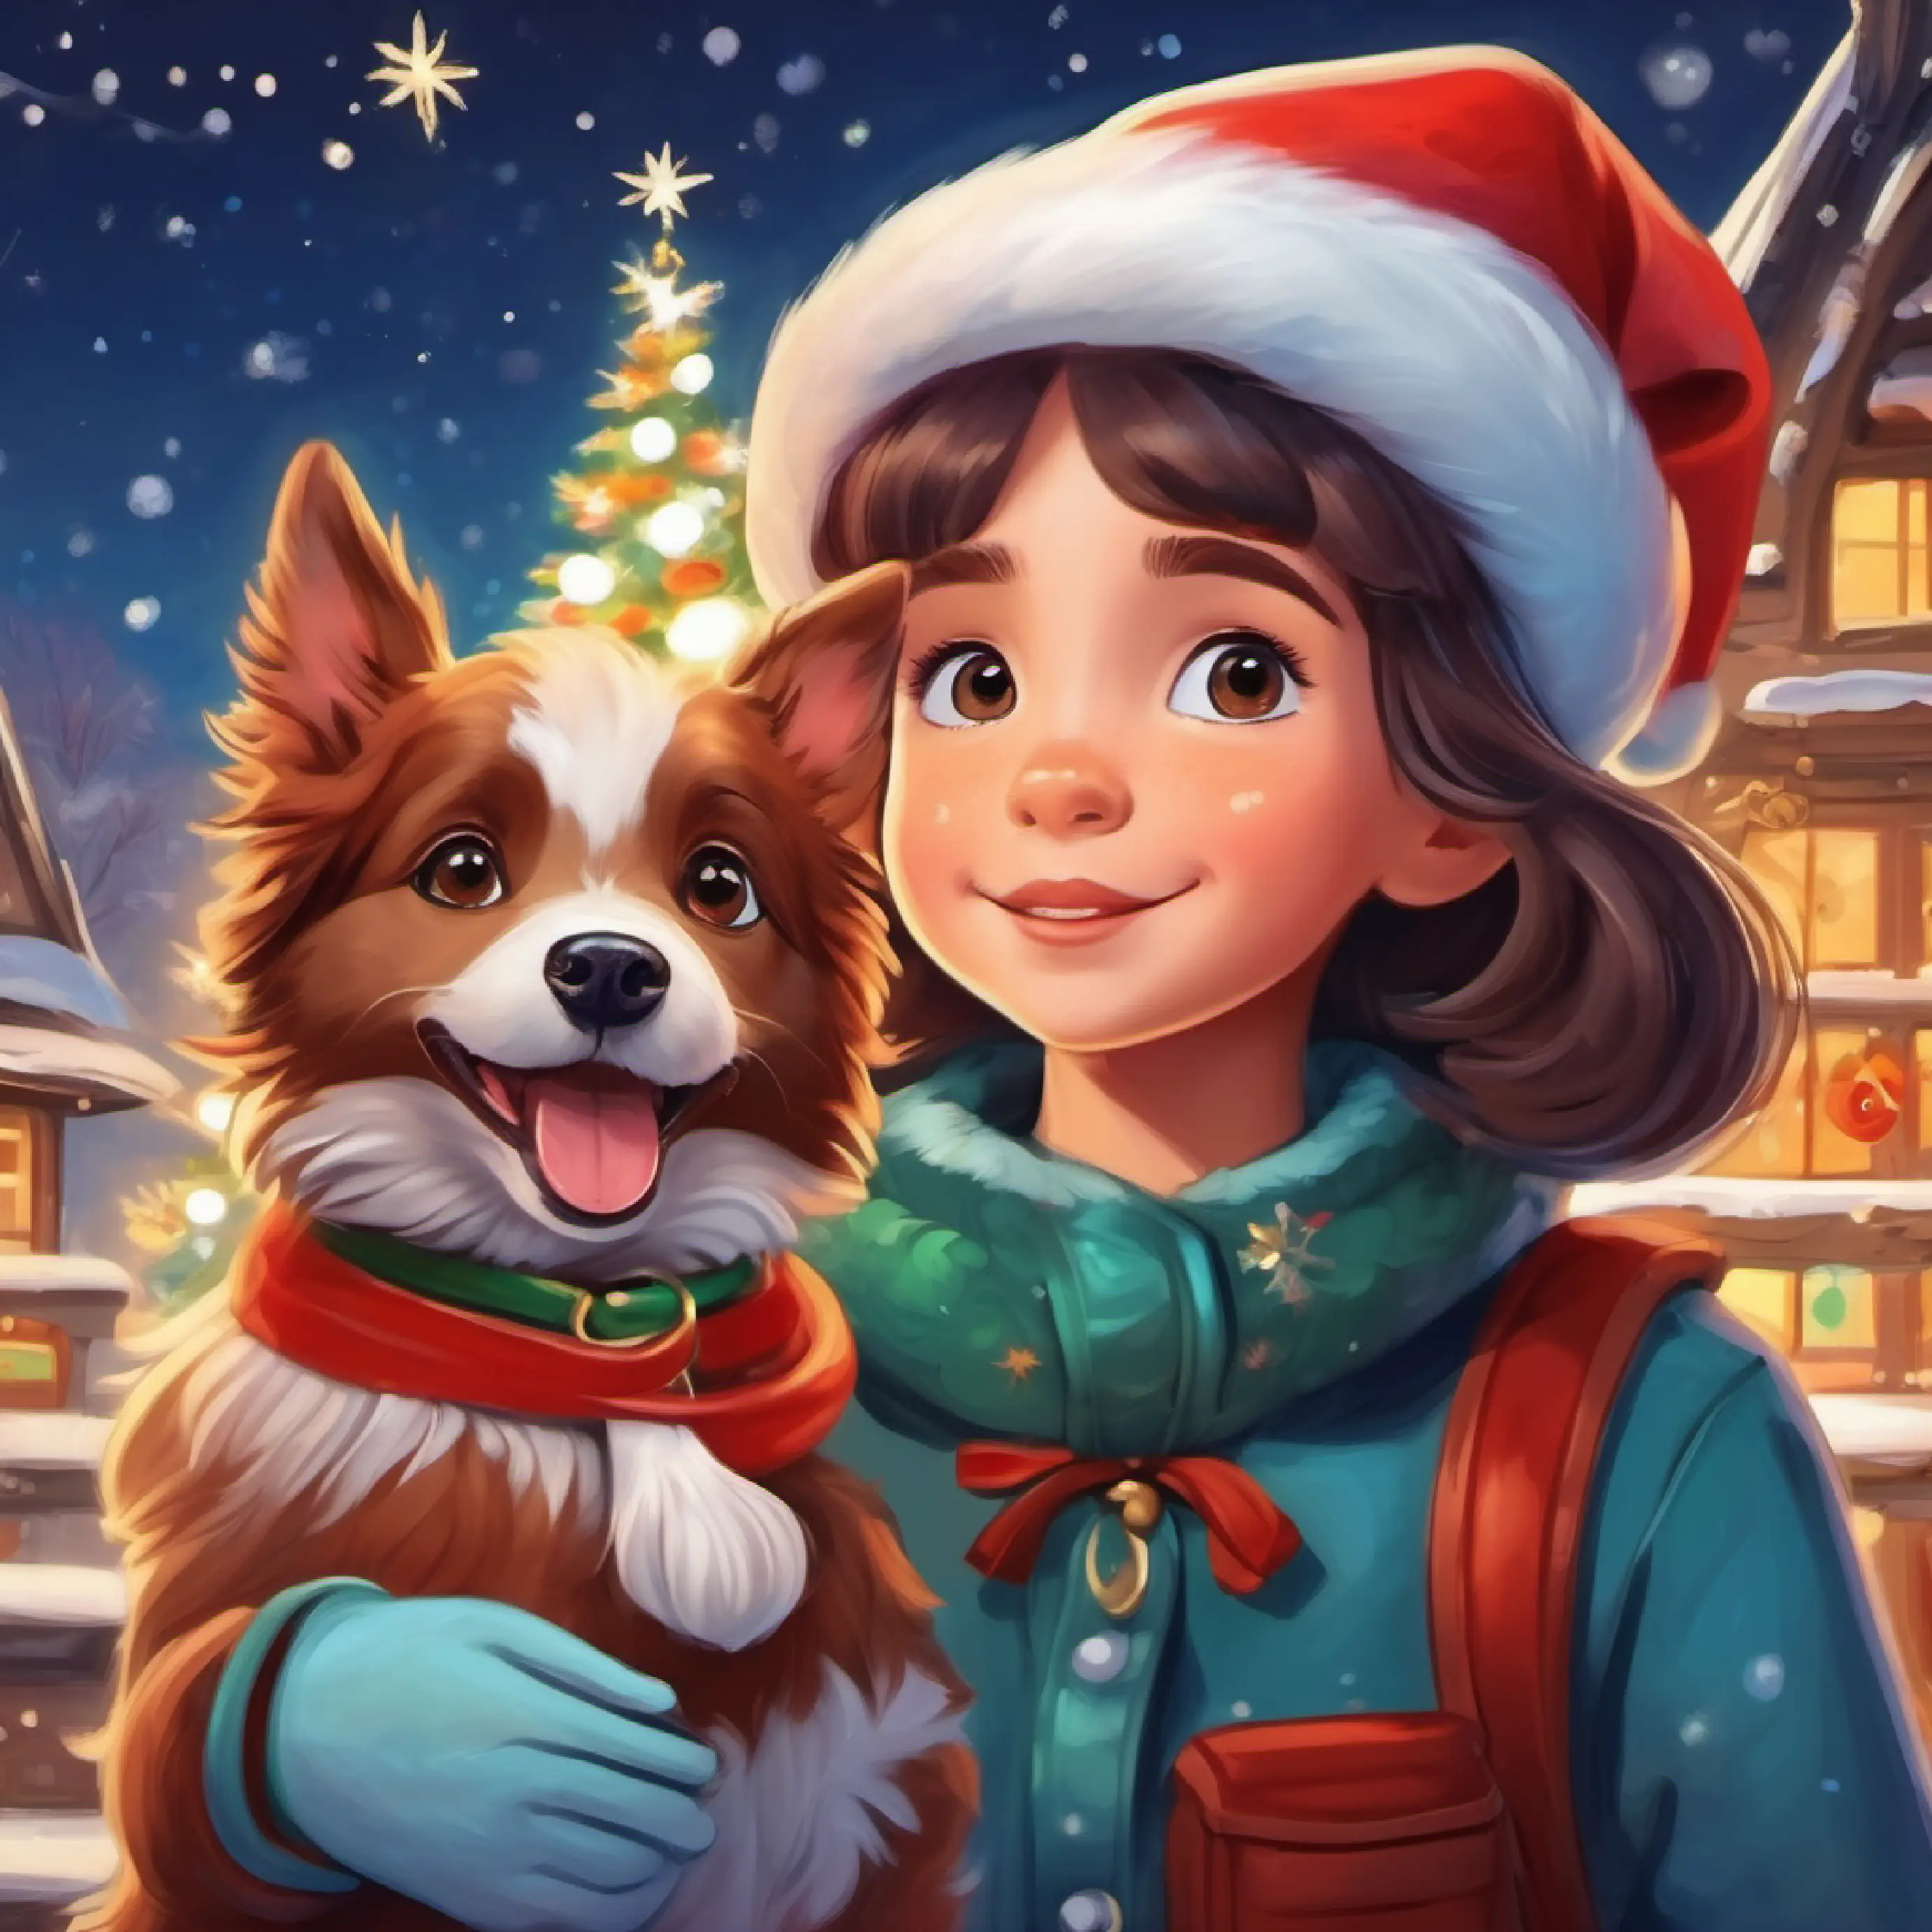 Curious girl with wonder in her eyes, Benny's adventurous friend promises to keep Loyal dog with the secret ability to talk, cheerful and playful's secret